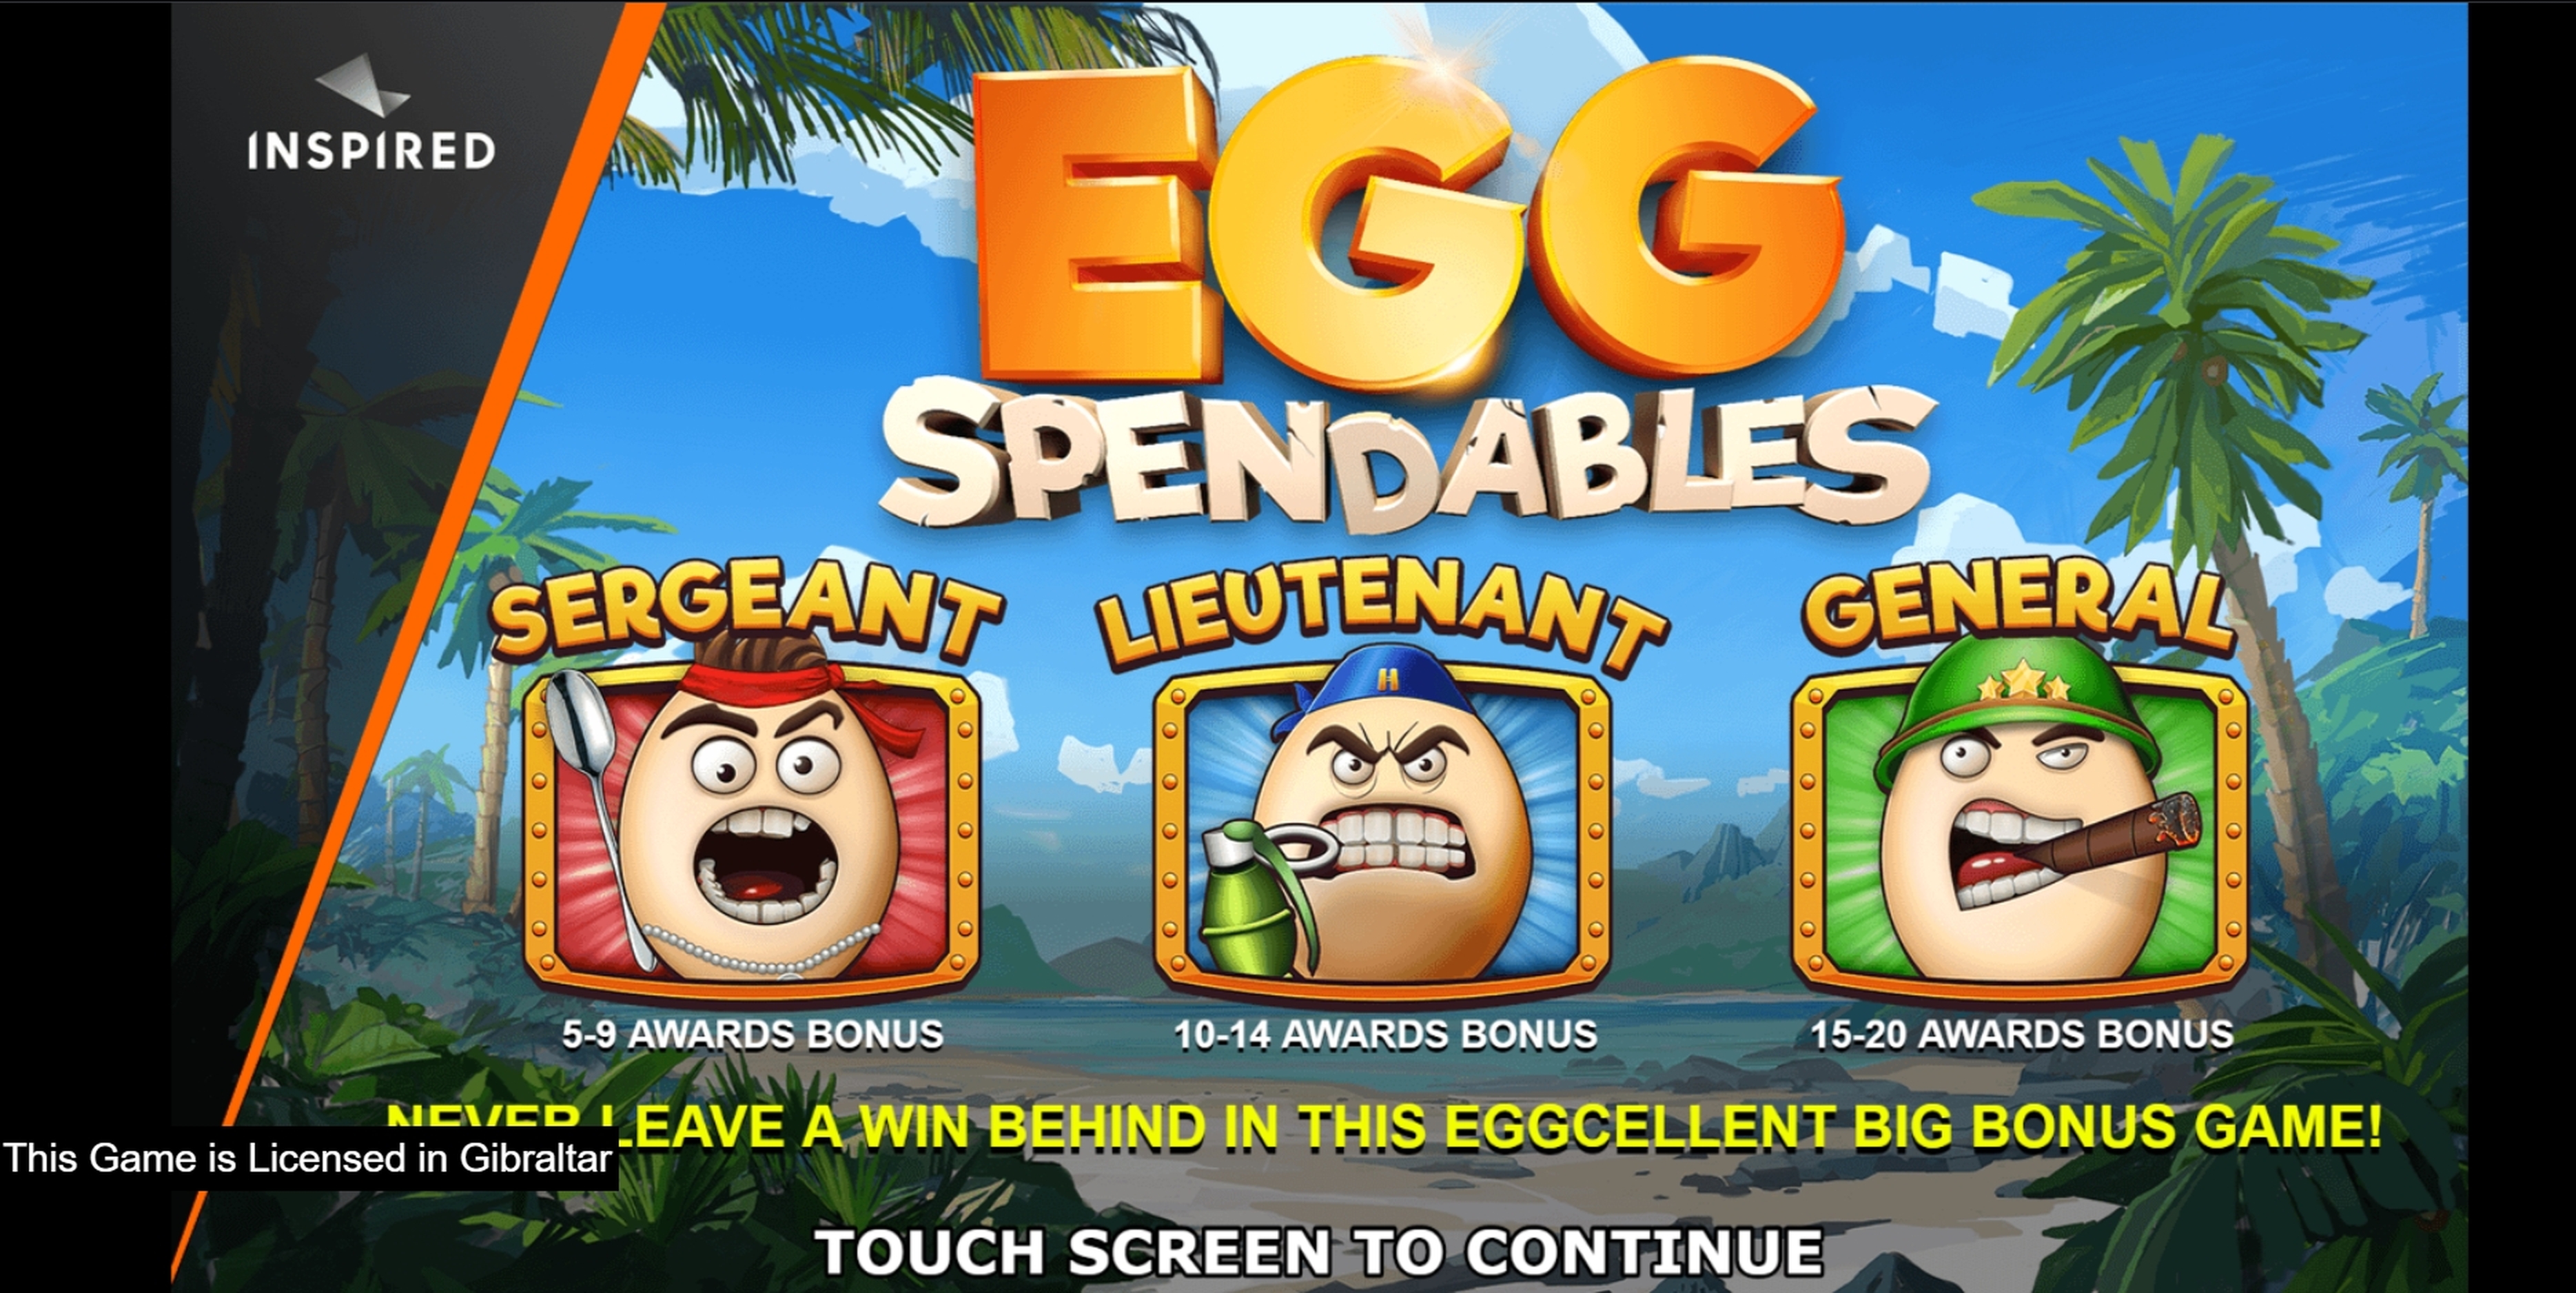 Play Eggspendables Free Casino Slot Game by Incredible Technologies